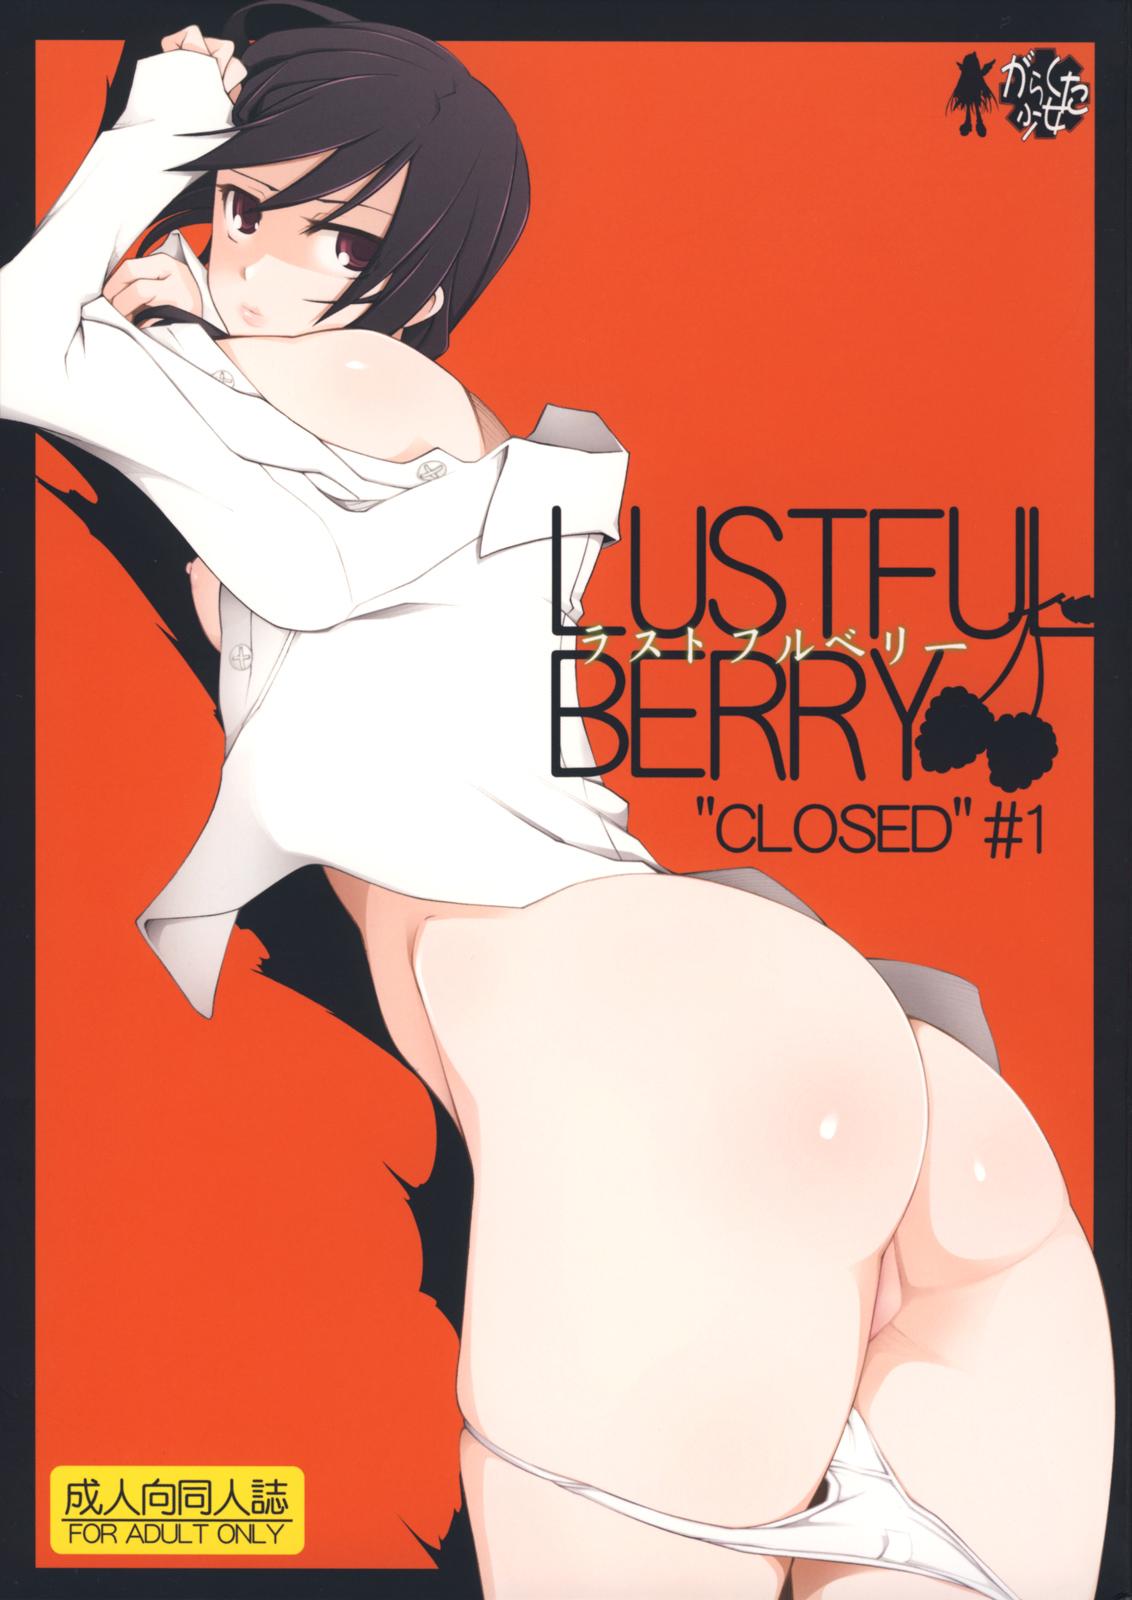 Oldvsyoung LUSTFUL BERRY ''CLOSED''#1 Gostosas - Picture 1